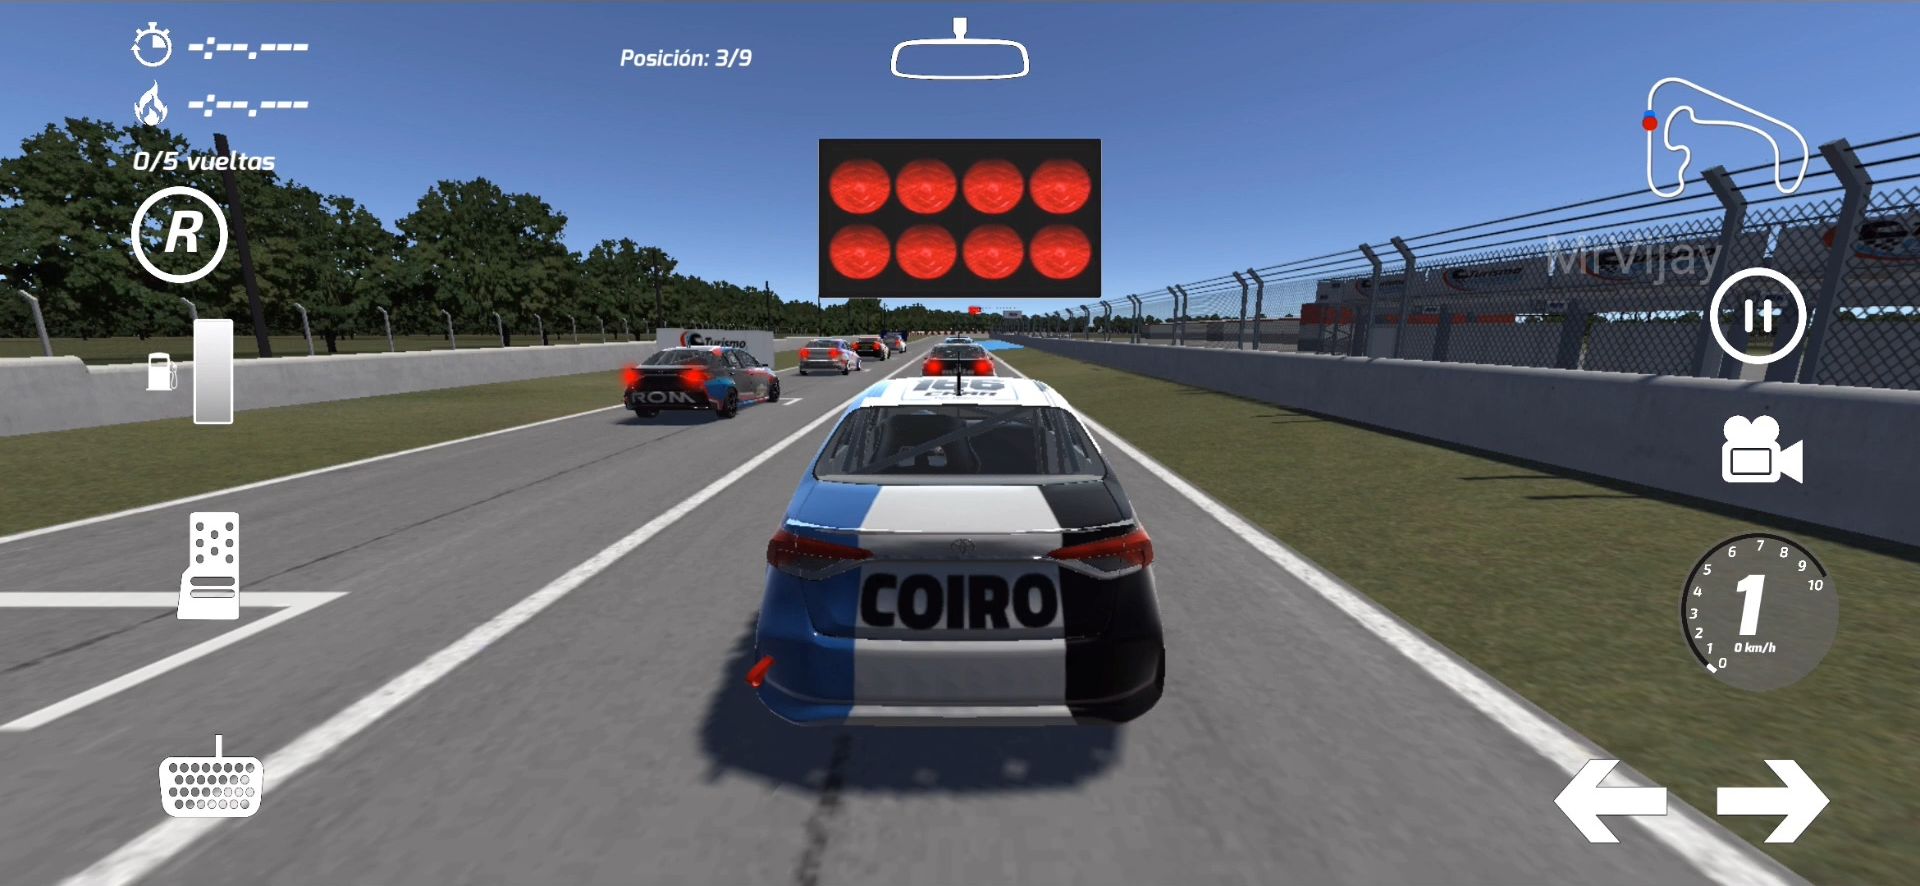 Full version of Android Cars game apk Turismo Nacional for tablet and phone.